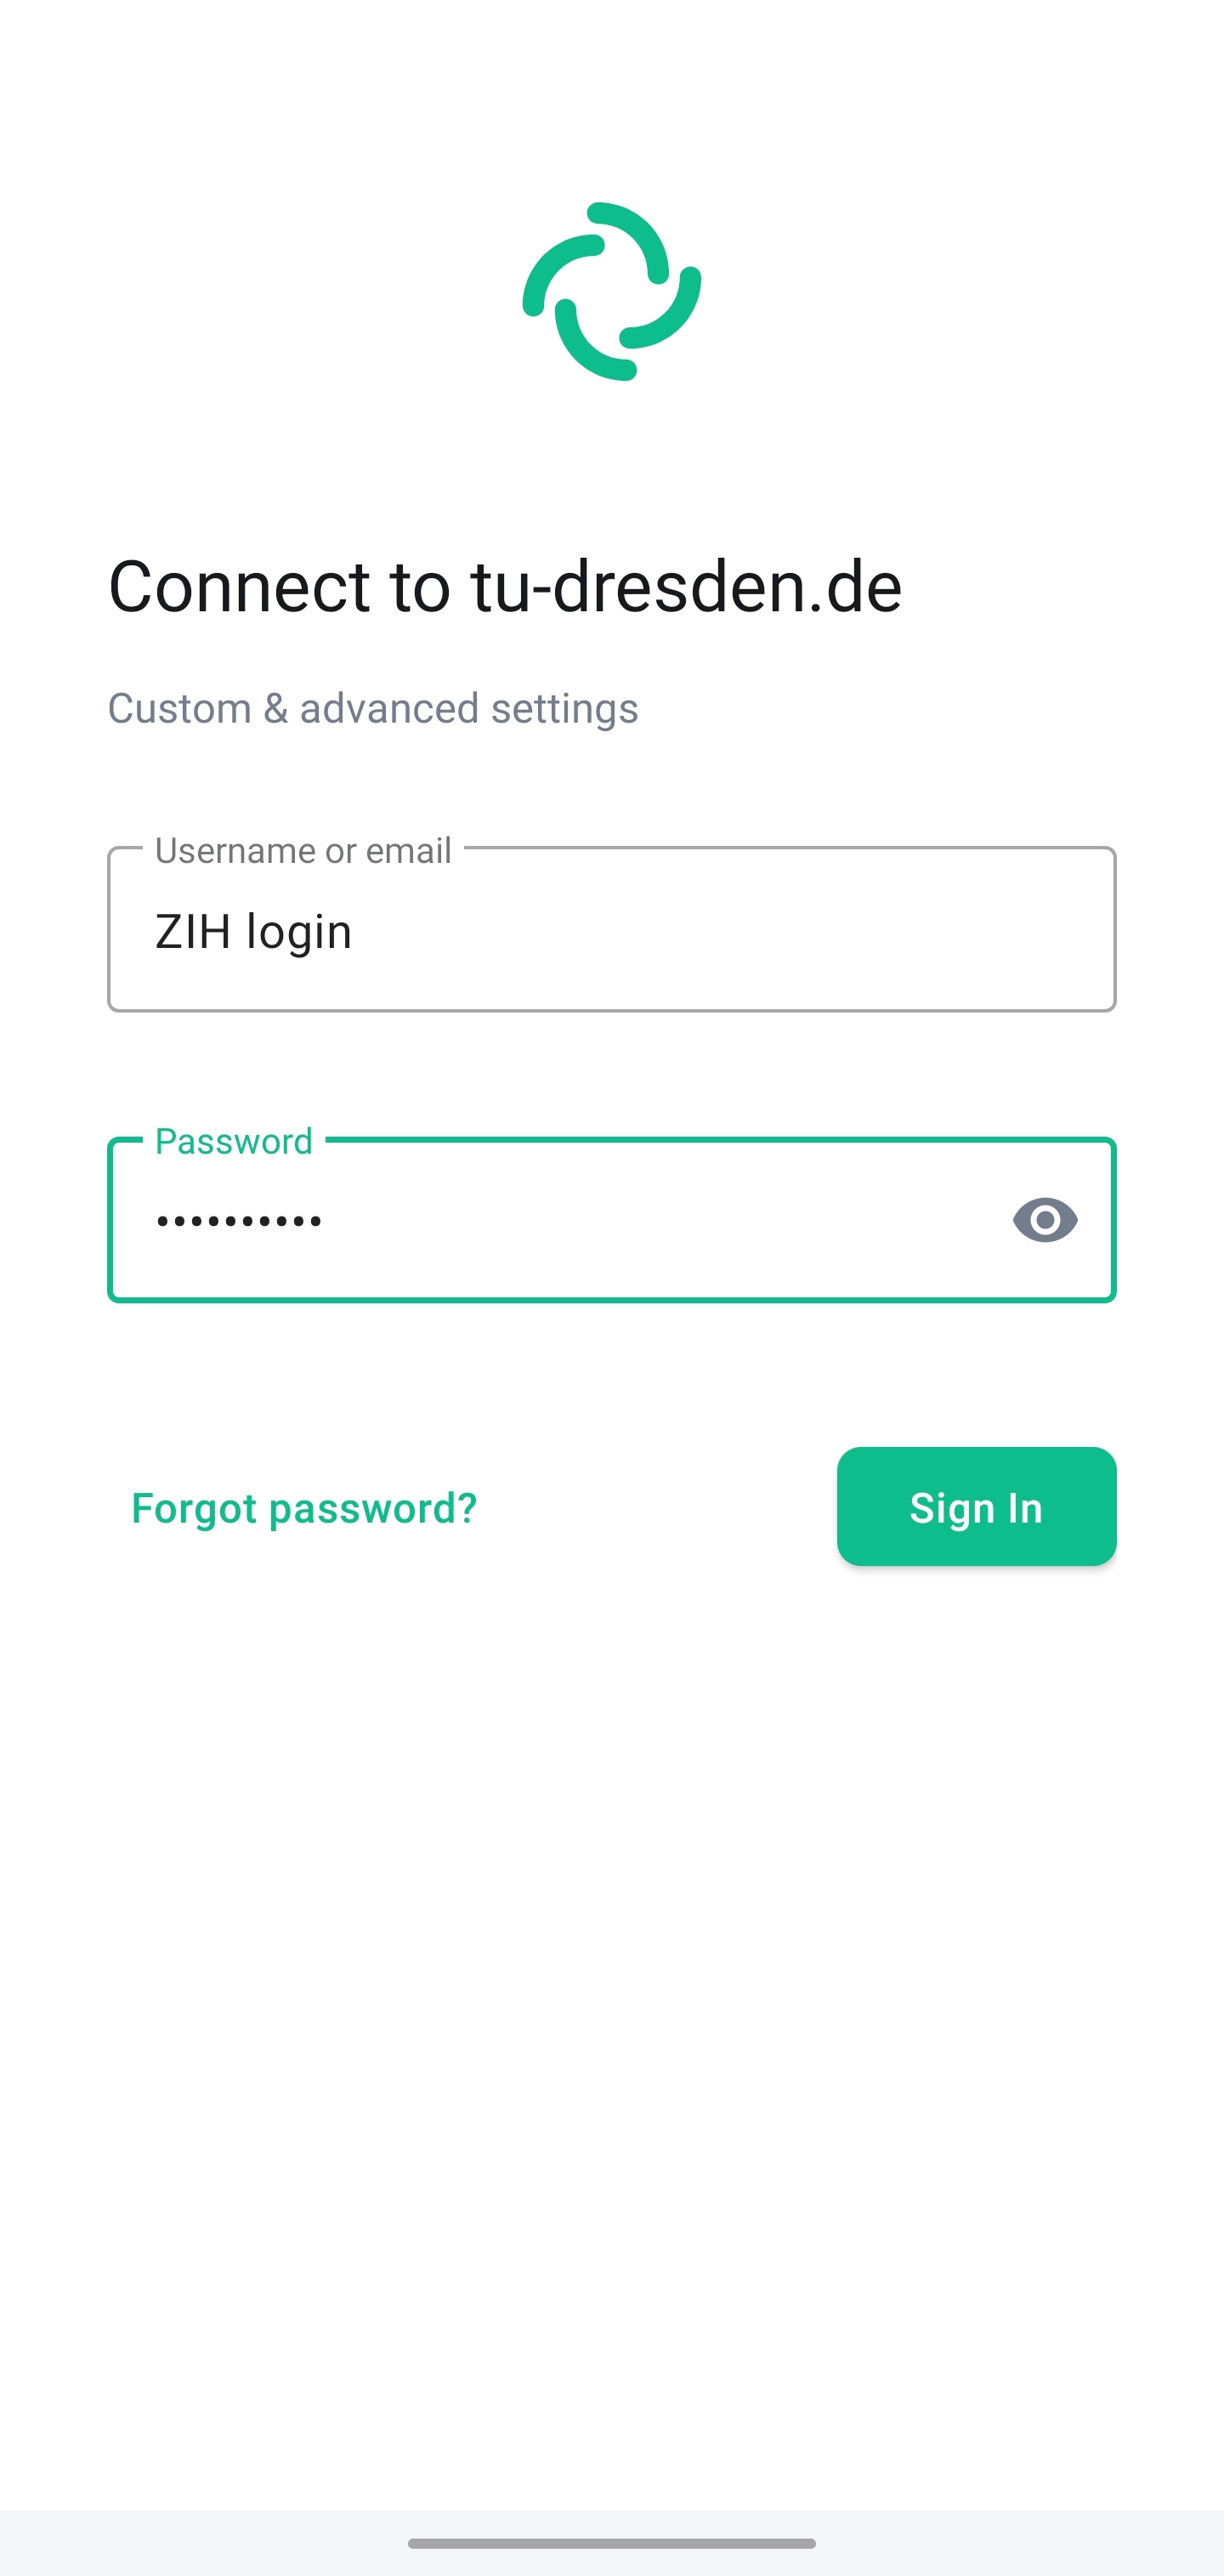 Screen “Connect to tu-dresden.de” expects the input of the ZIH login in the text field “Username or email” and the input of the ZIH password in the text field “Password”. To connect, the button “Sign in” is on the display.